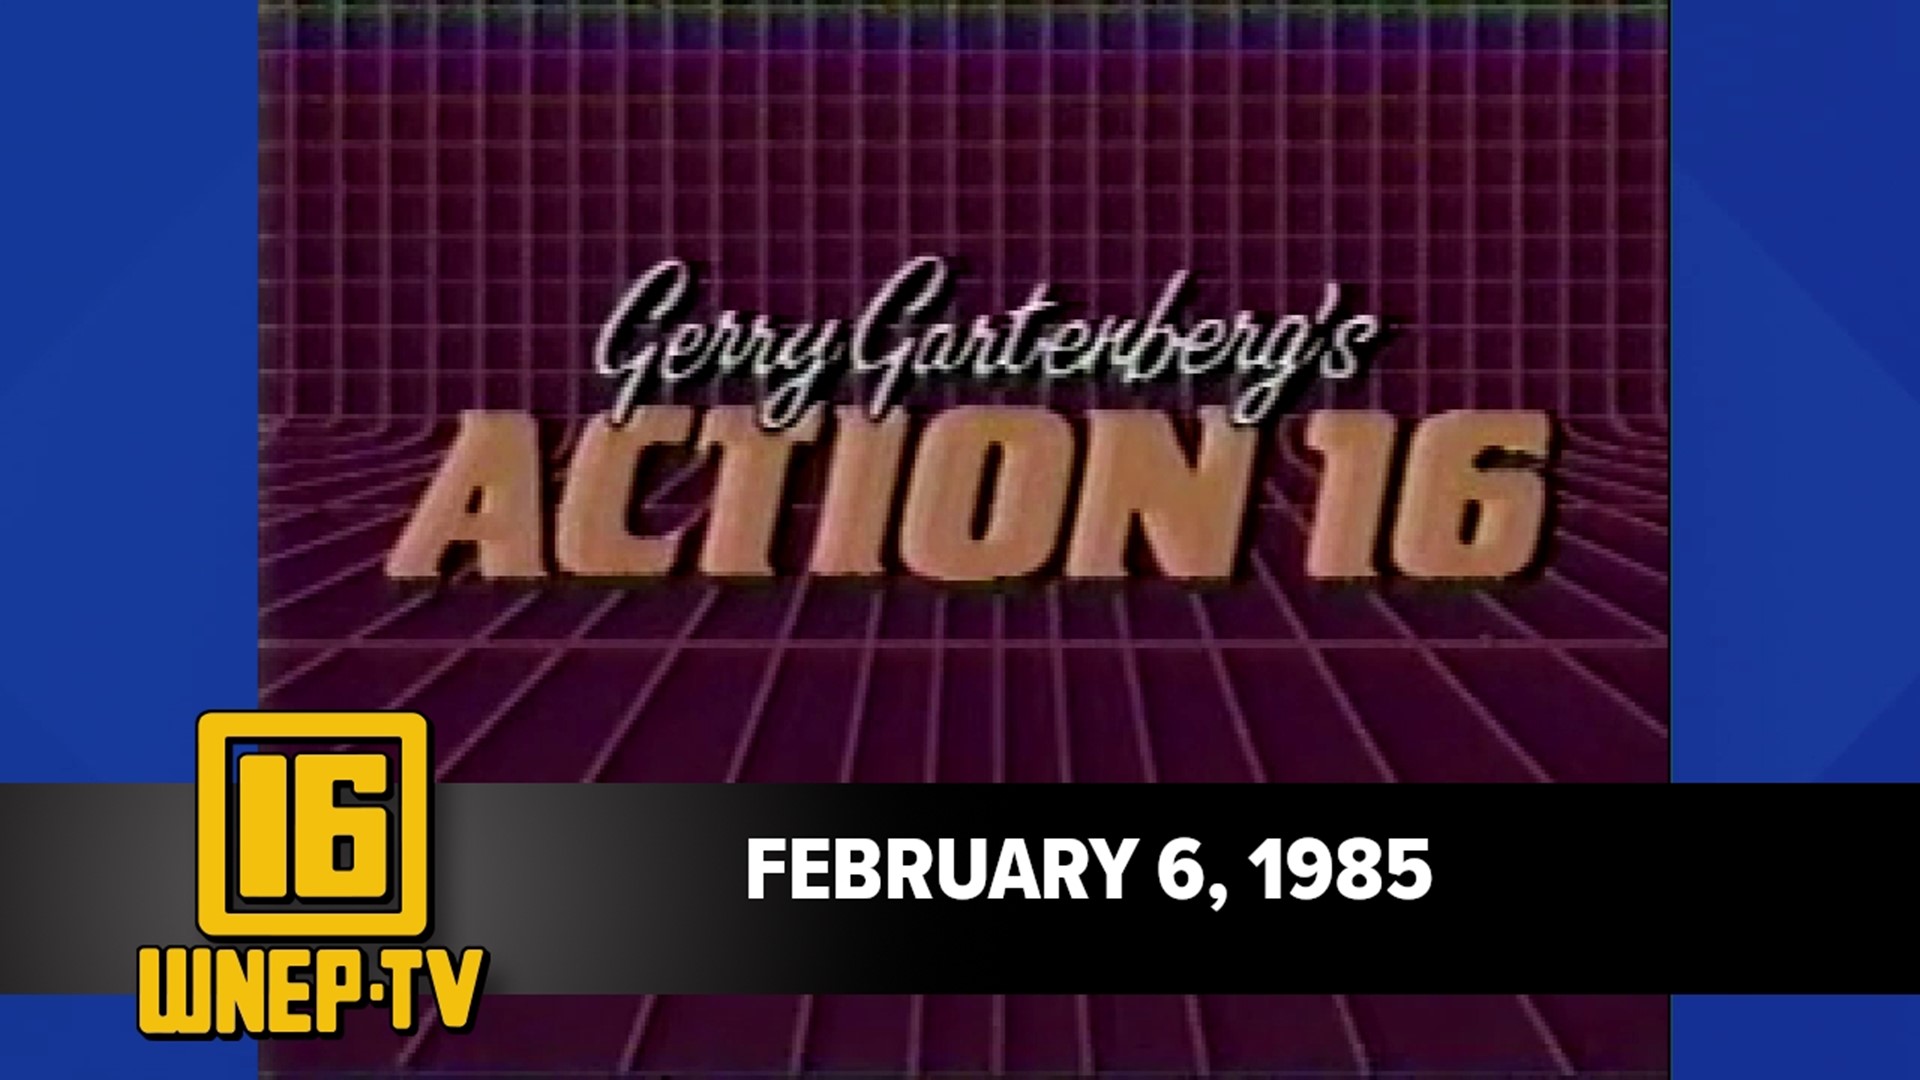 Join Karen Harch and Nolan Johannes with curated stories from February 6, 1985.